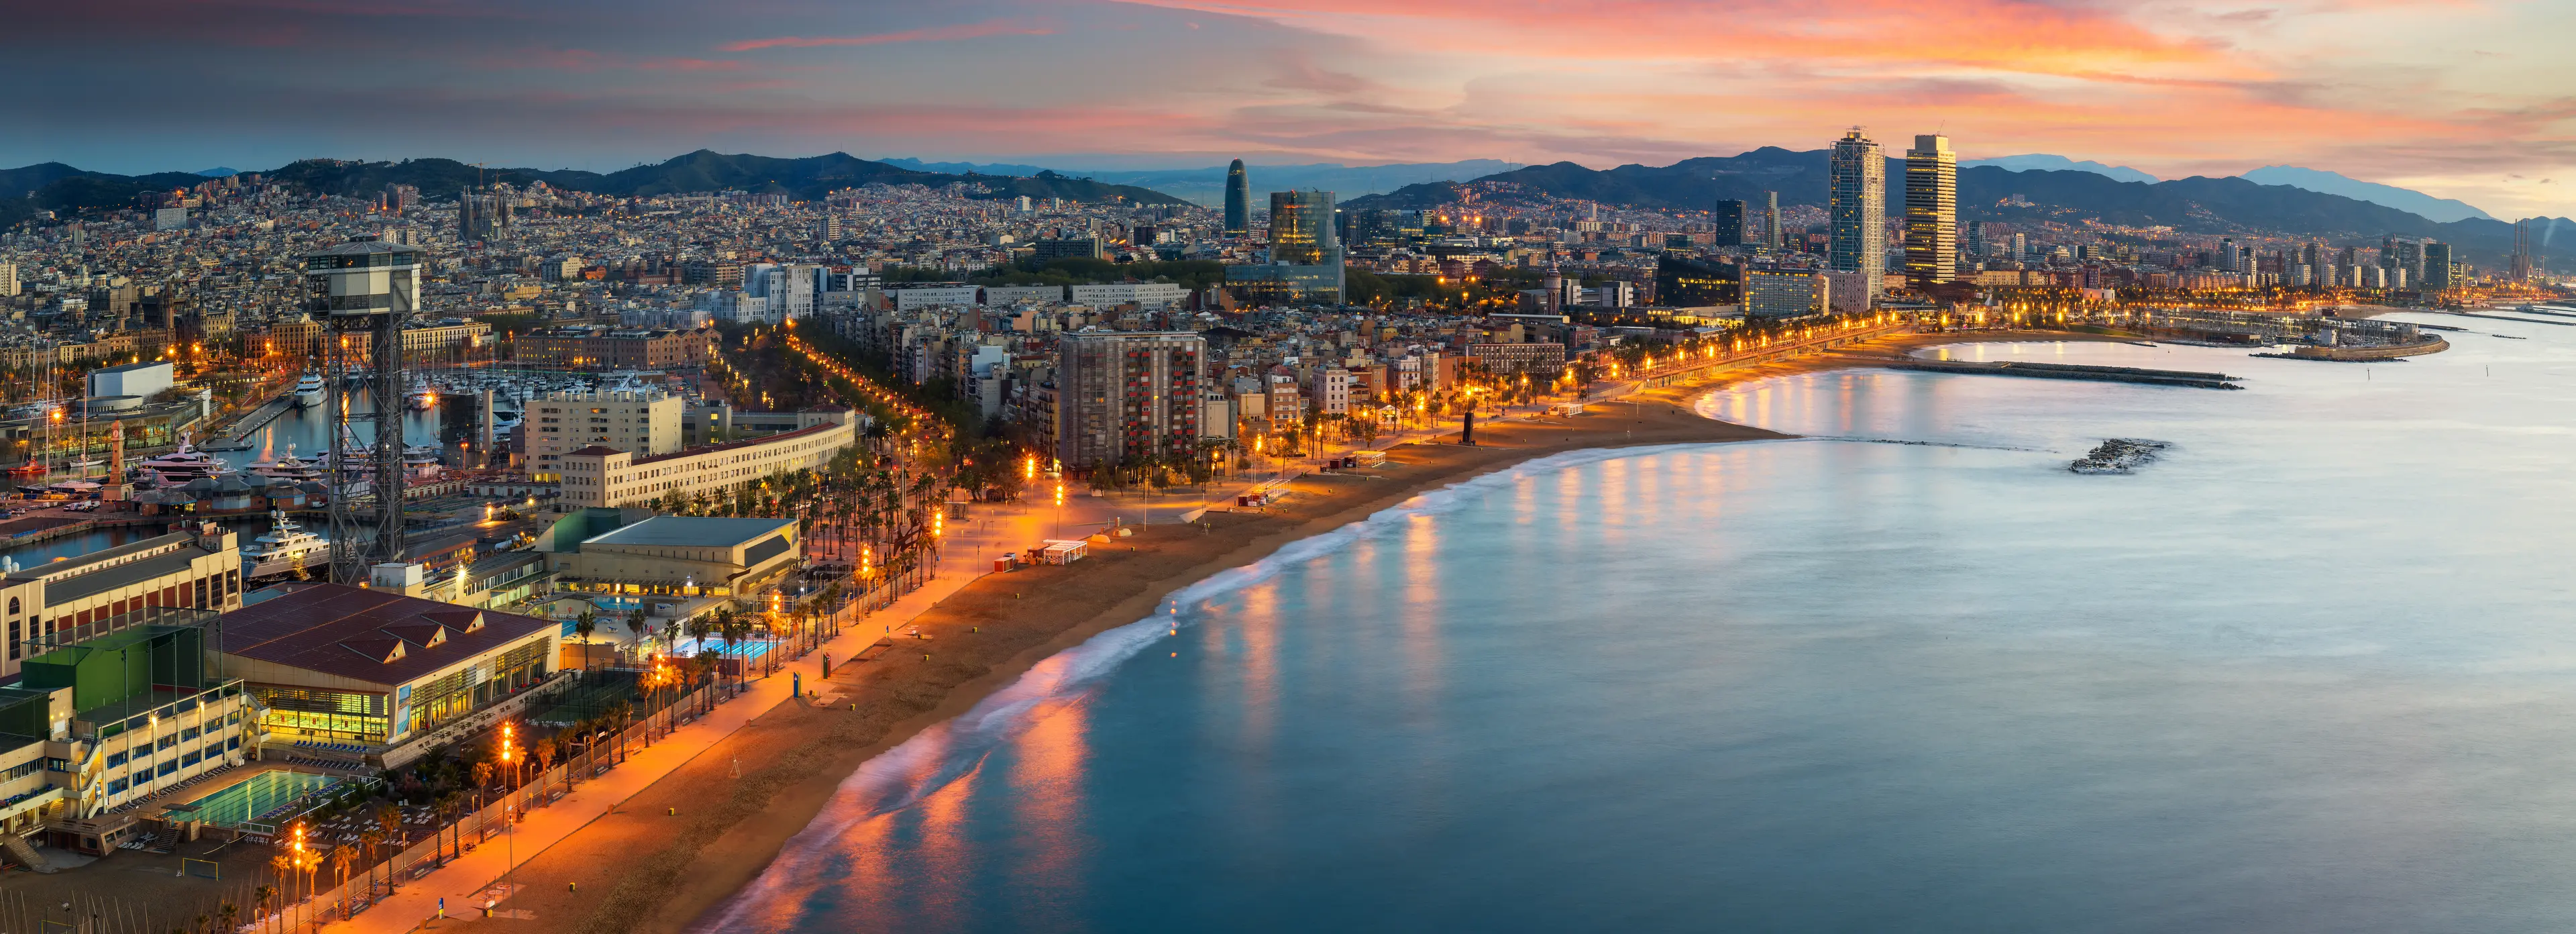 2-Day Food, Wine & Nightlife Barcelona Experience for Friends